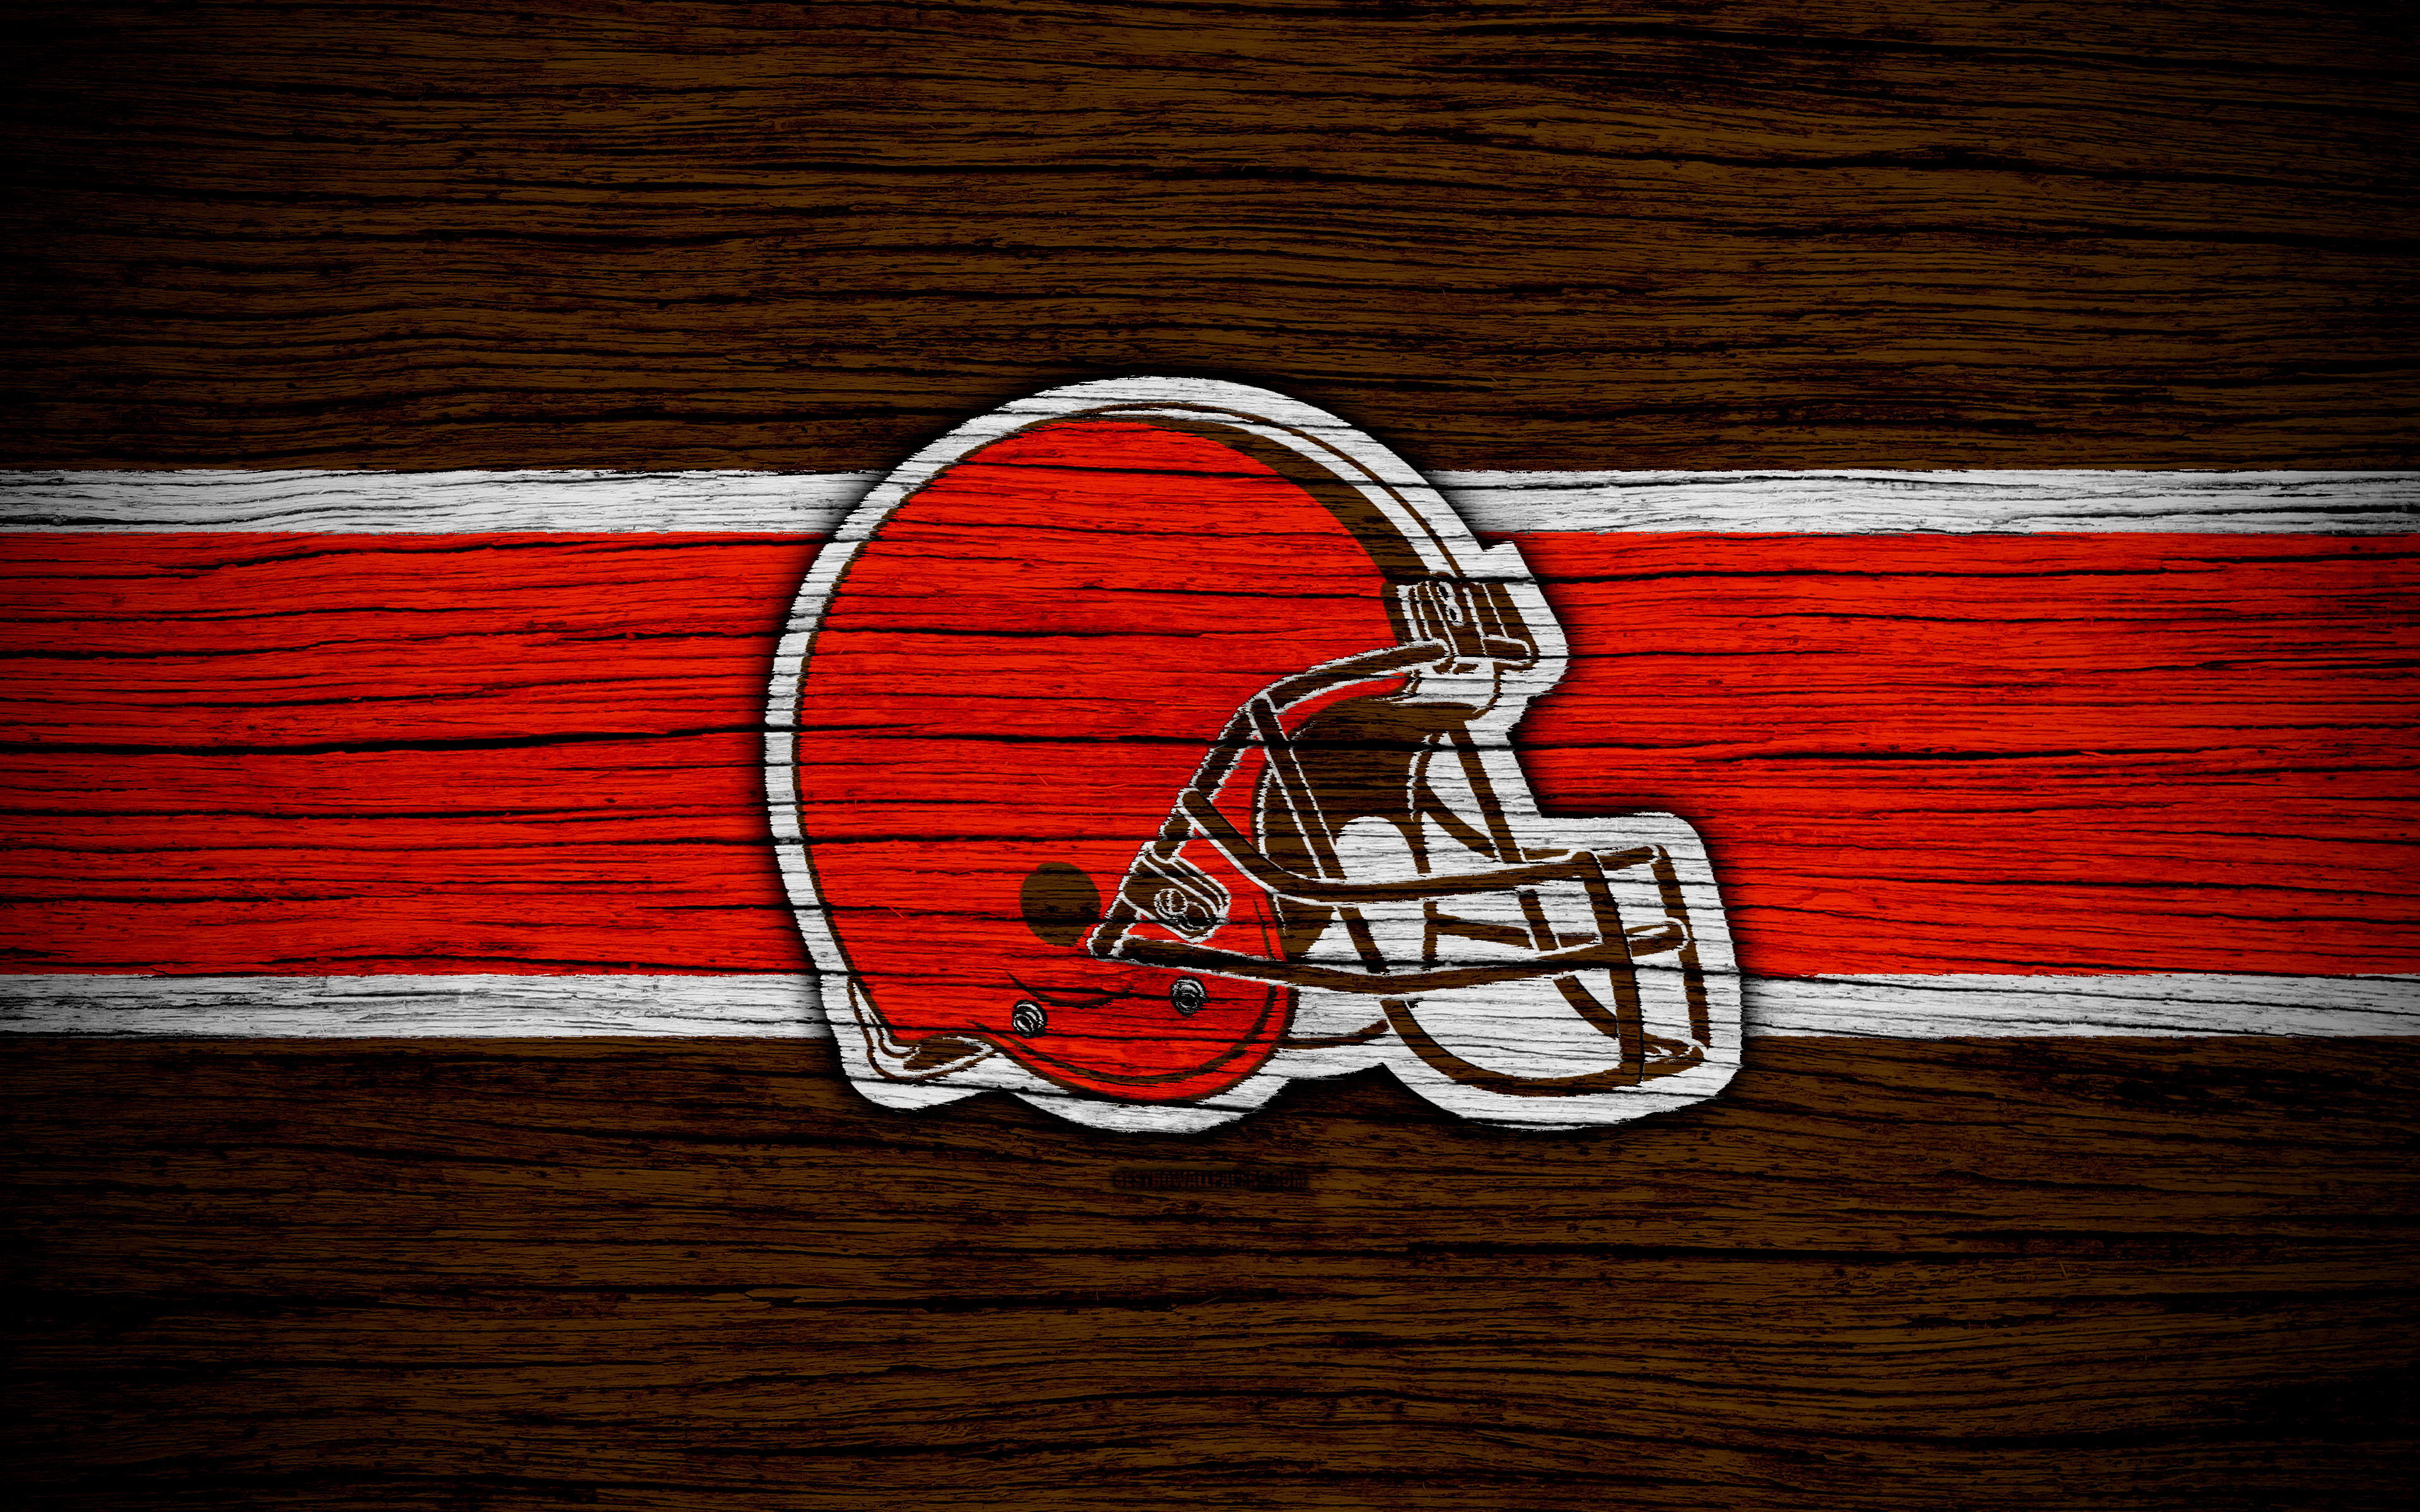 Cleveland Browns Nfl 4k Wooden Texture American Logos And